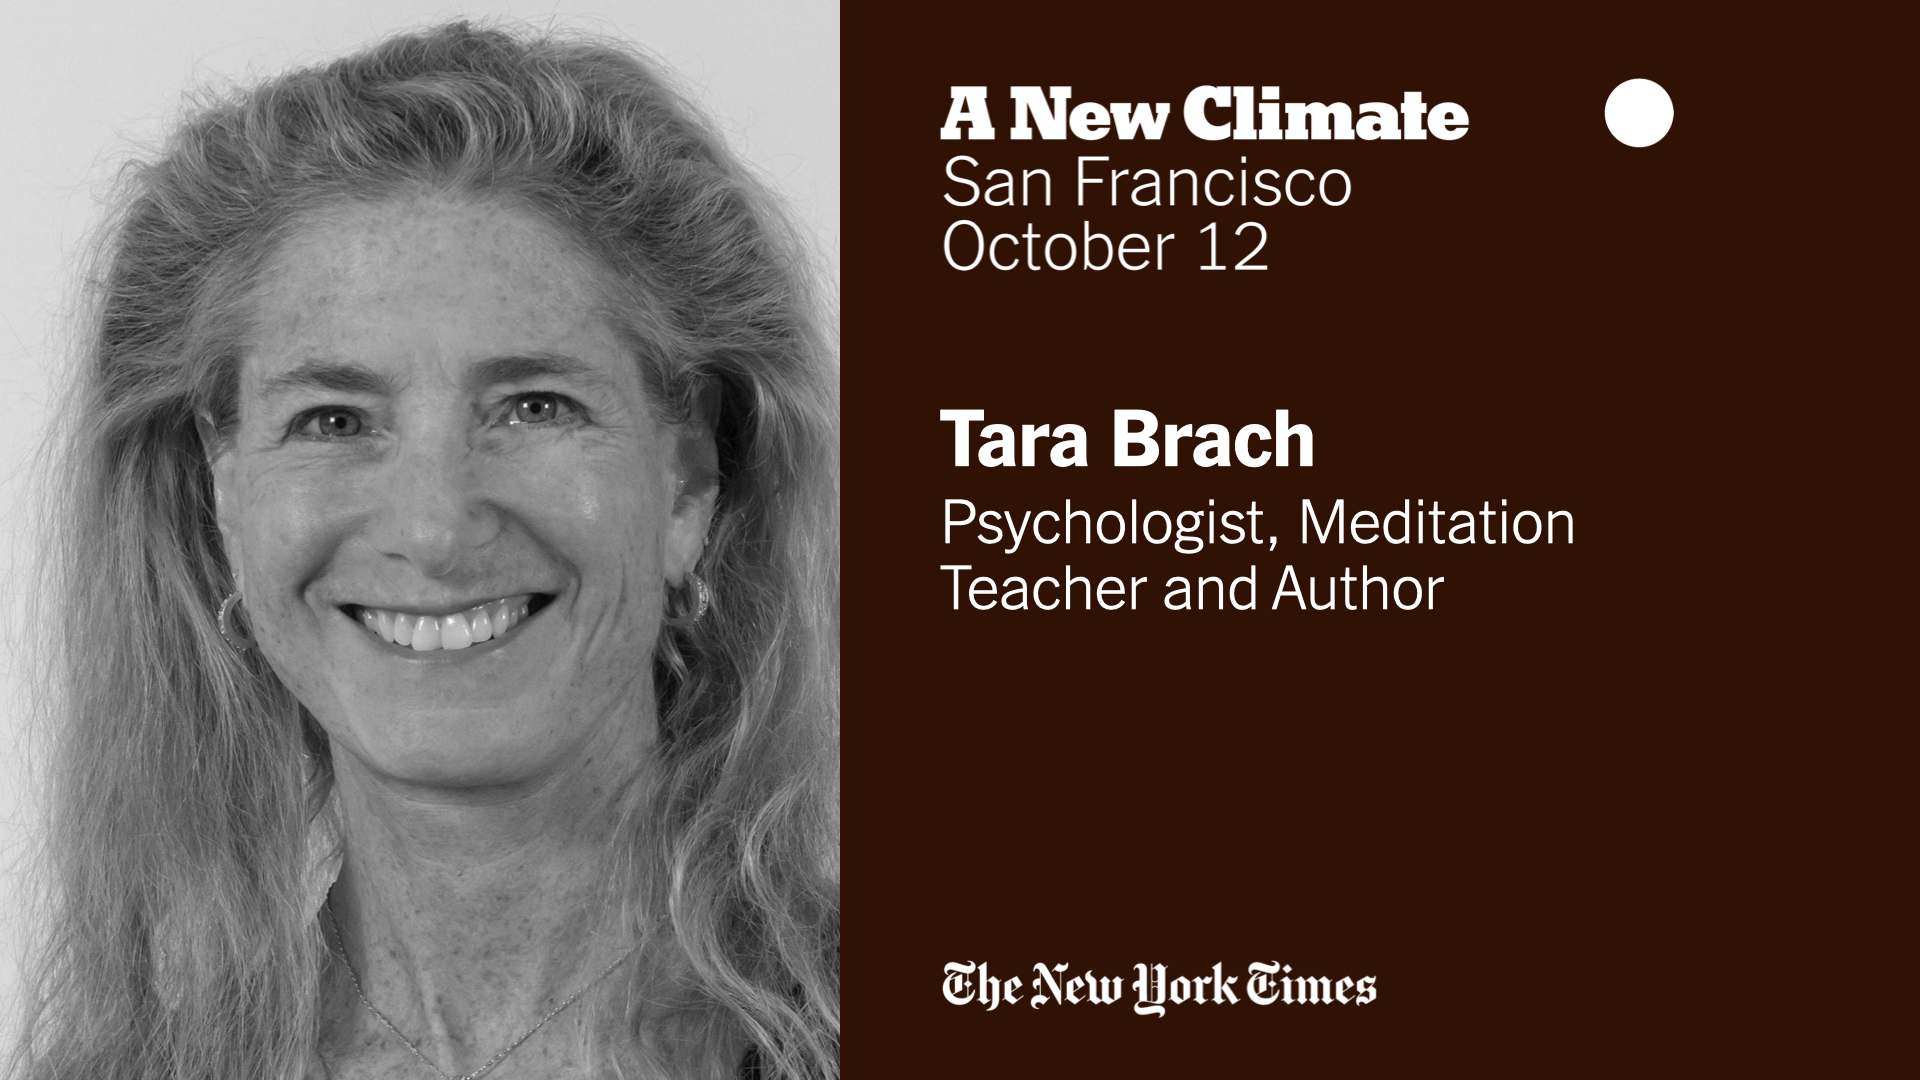 New York Times: A New Climate